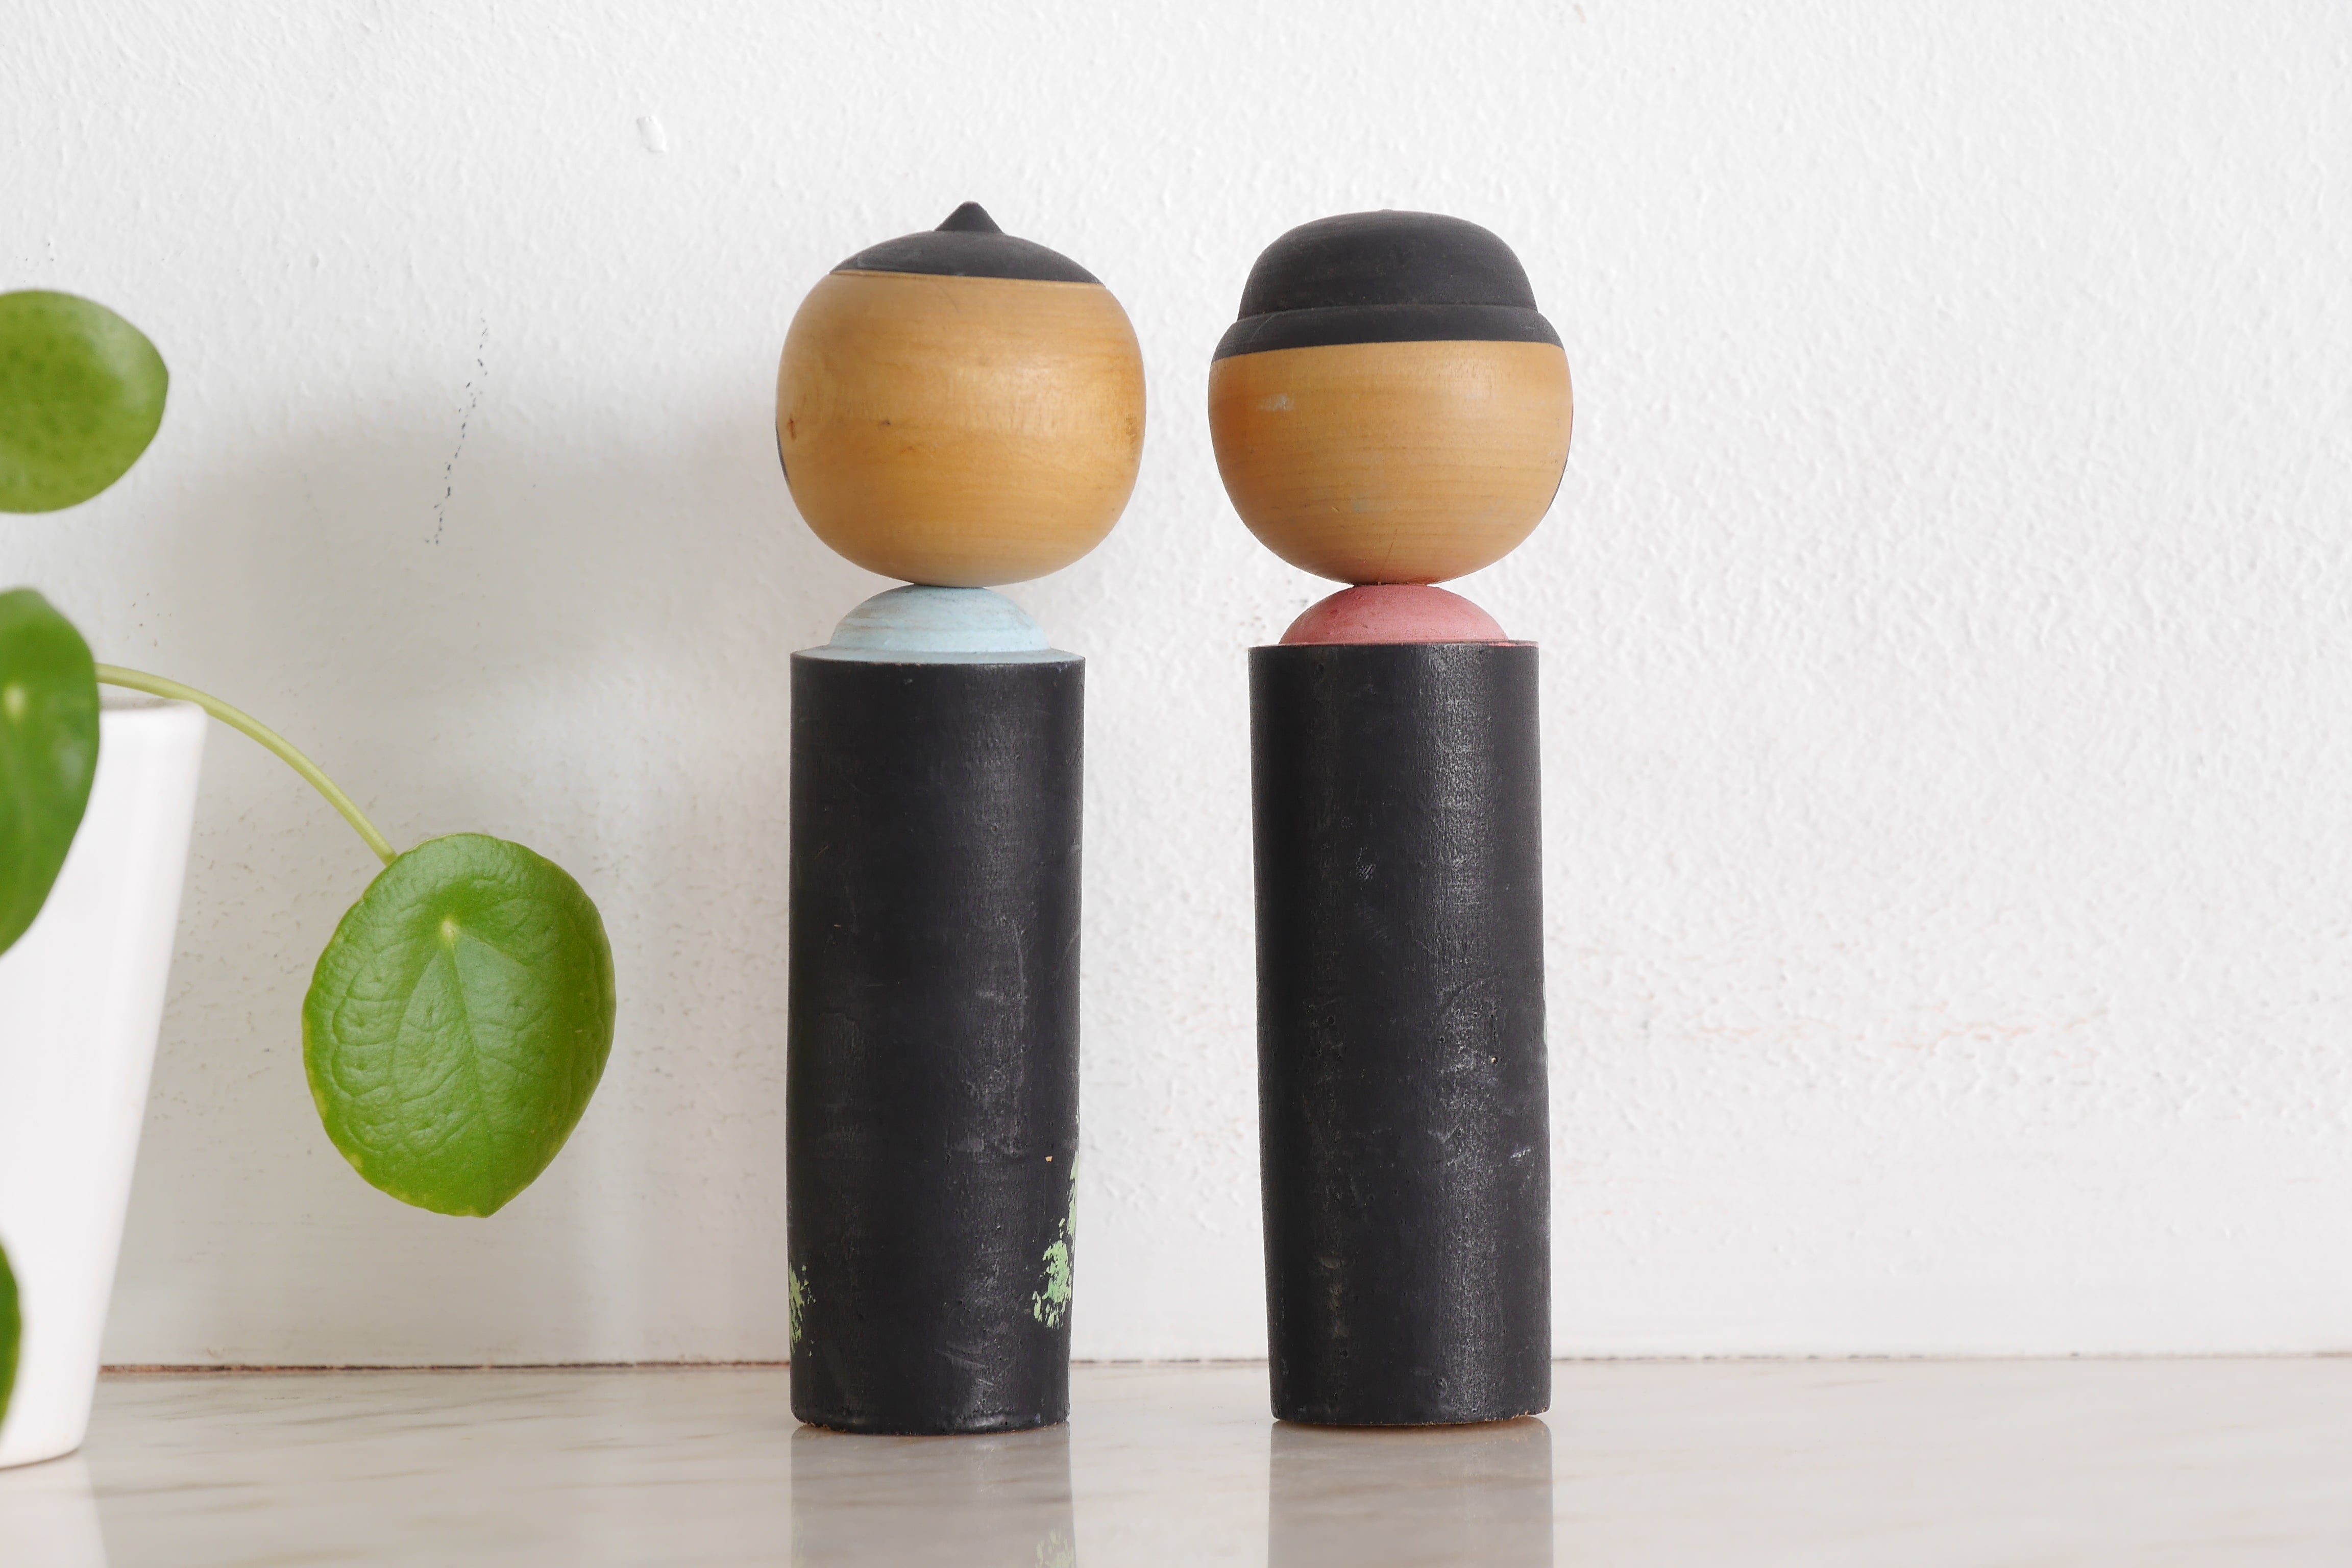 A lovely pair of Vintage Creative Kokeshi